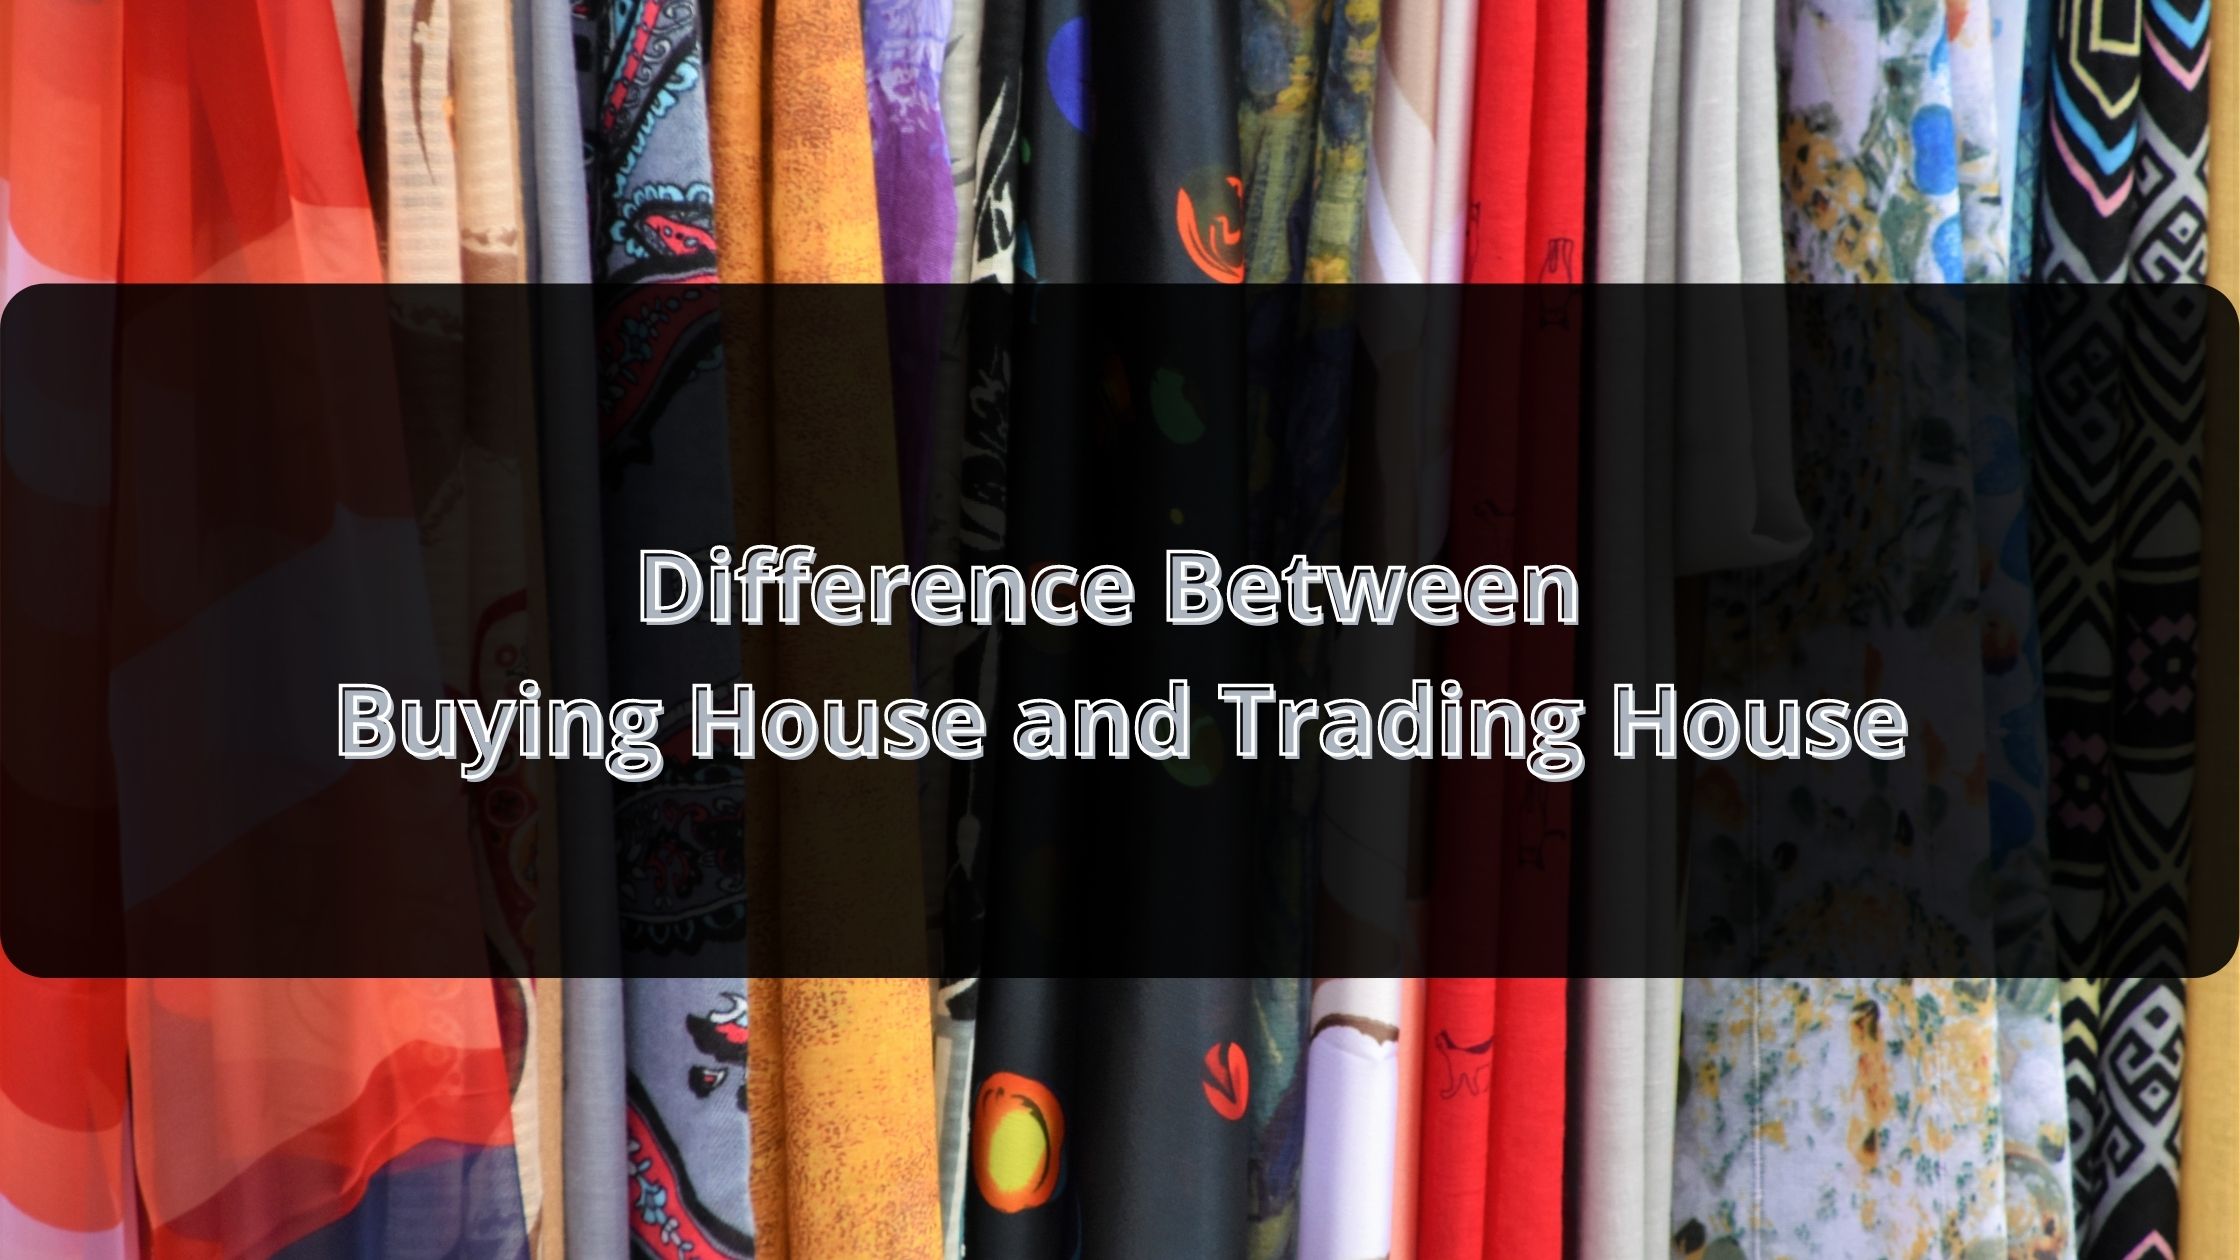 Difference between Buying House and Trading House